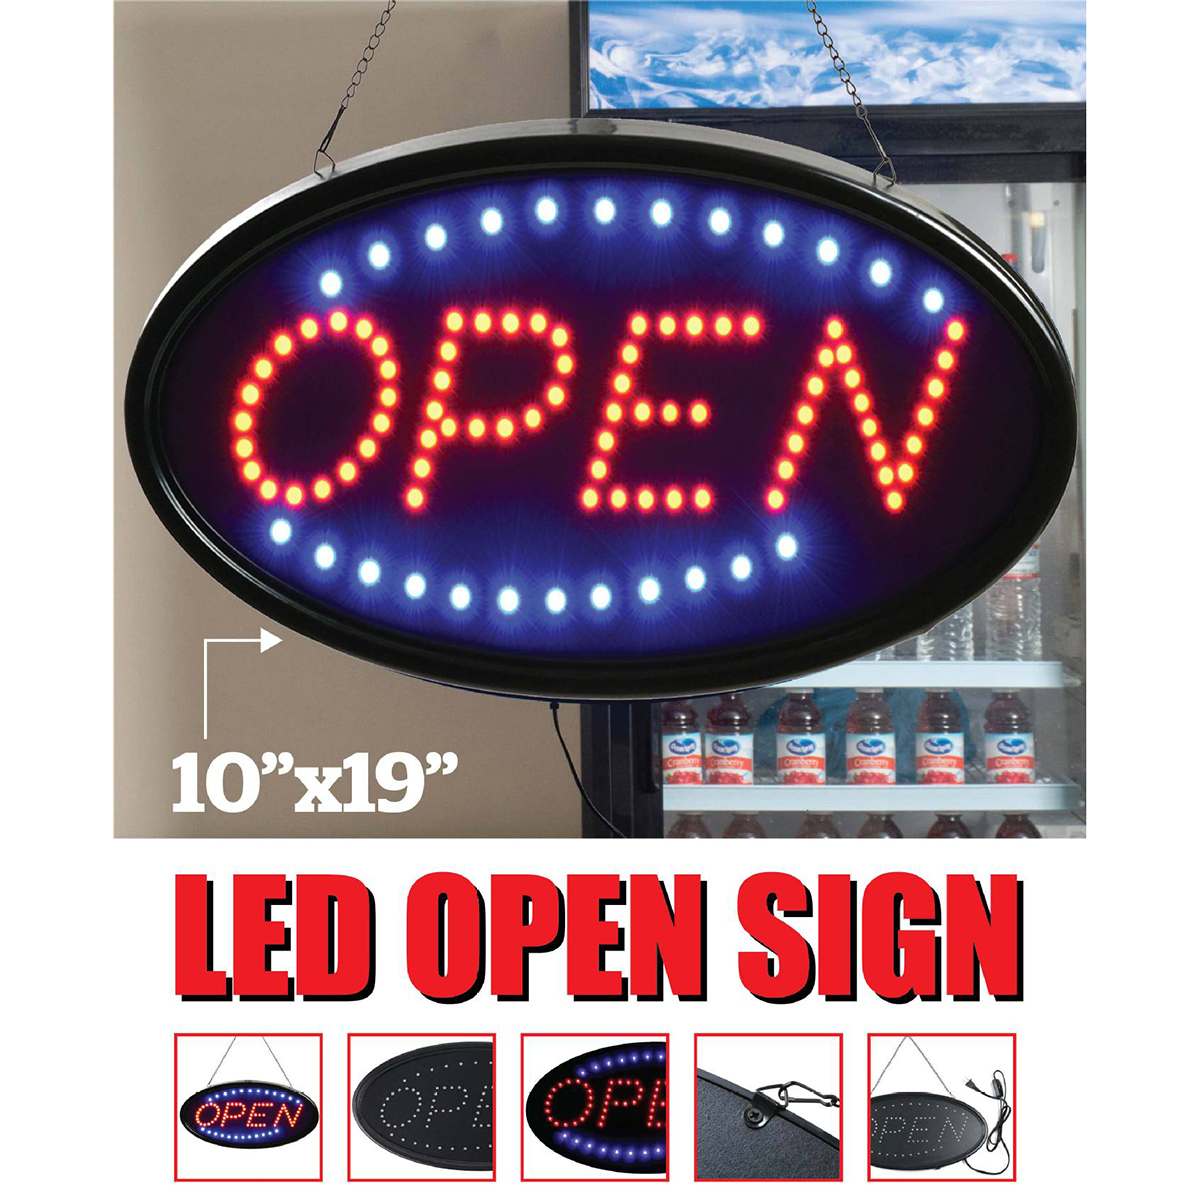 110V/220V Bright LED 2 in 1 Open & Close Store Shop Business Sign Display Neon 